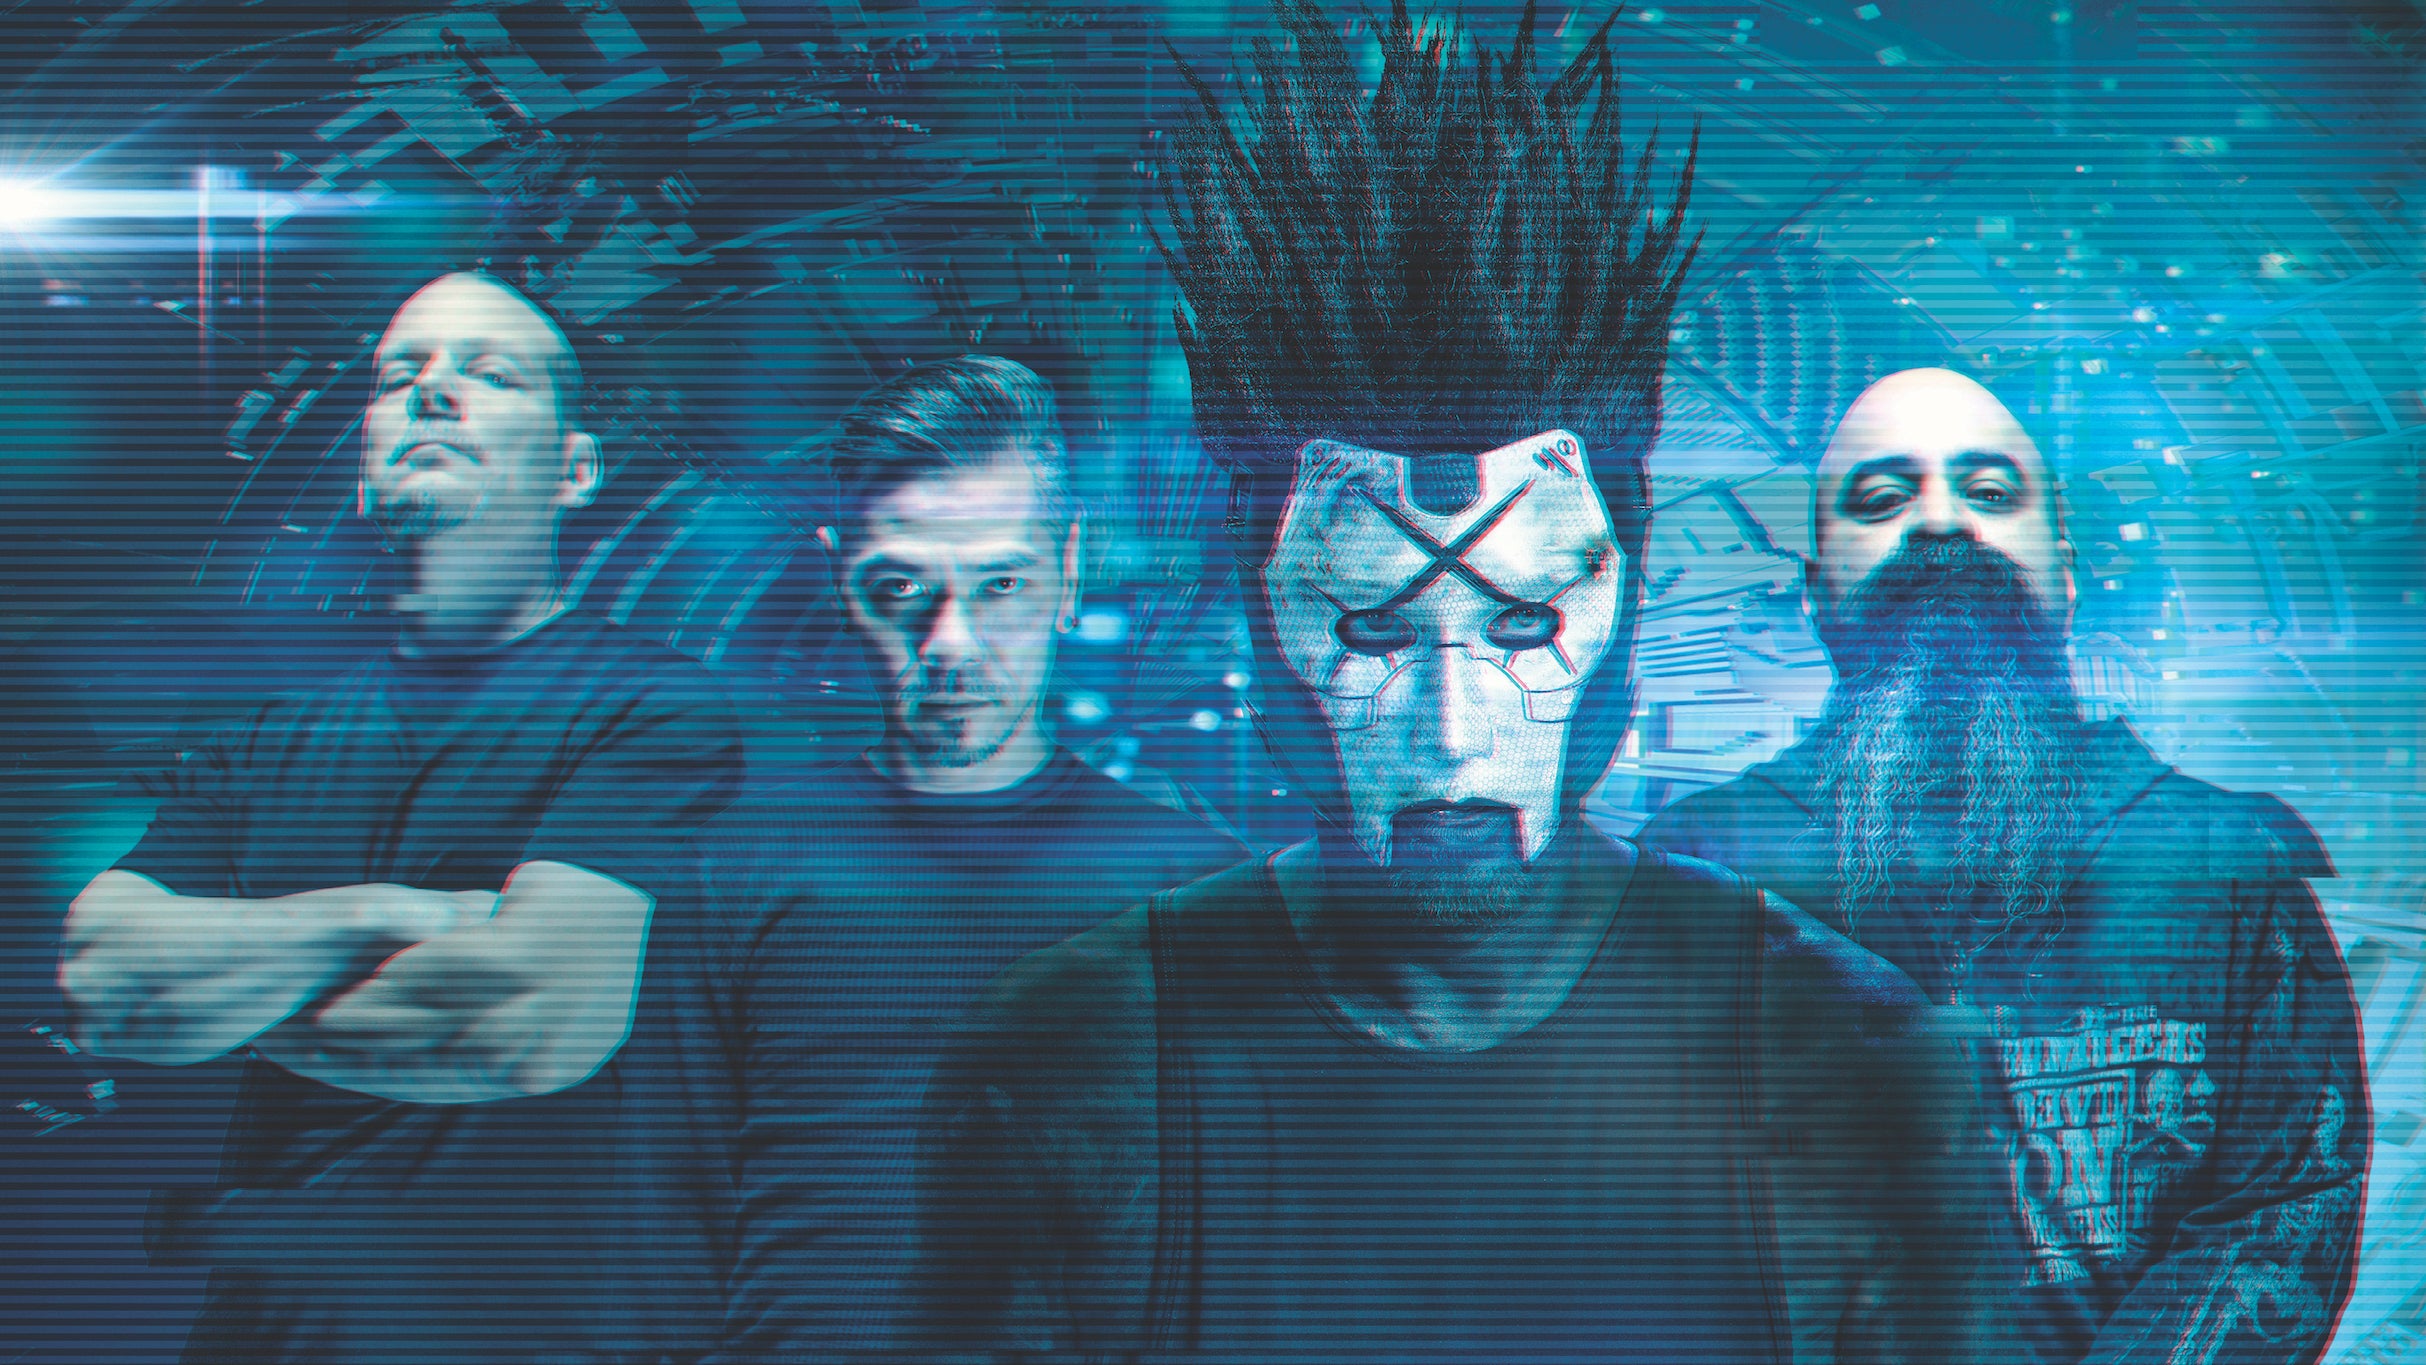 SNW Sideshow ft. Static - X & Sevendust presale code for event tickets in Las Vegas, NV (Pearl Concert Theater at Palms Casino Resort)